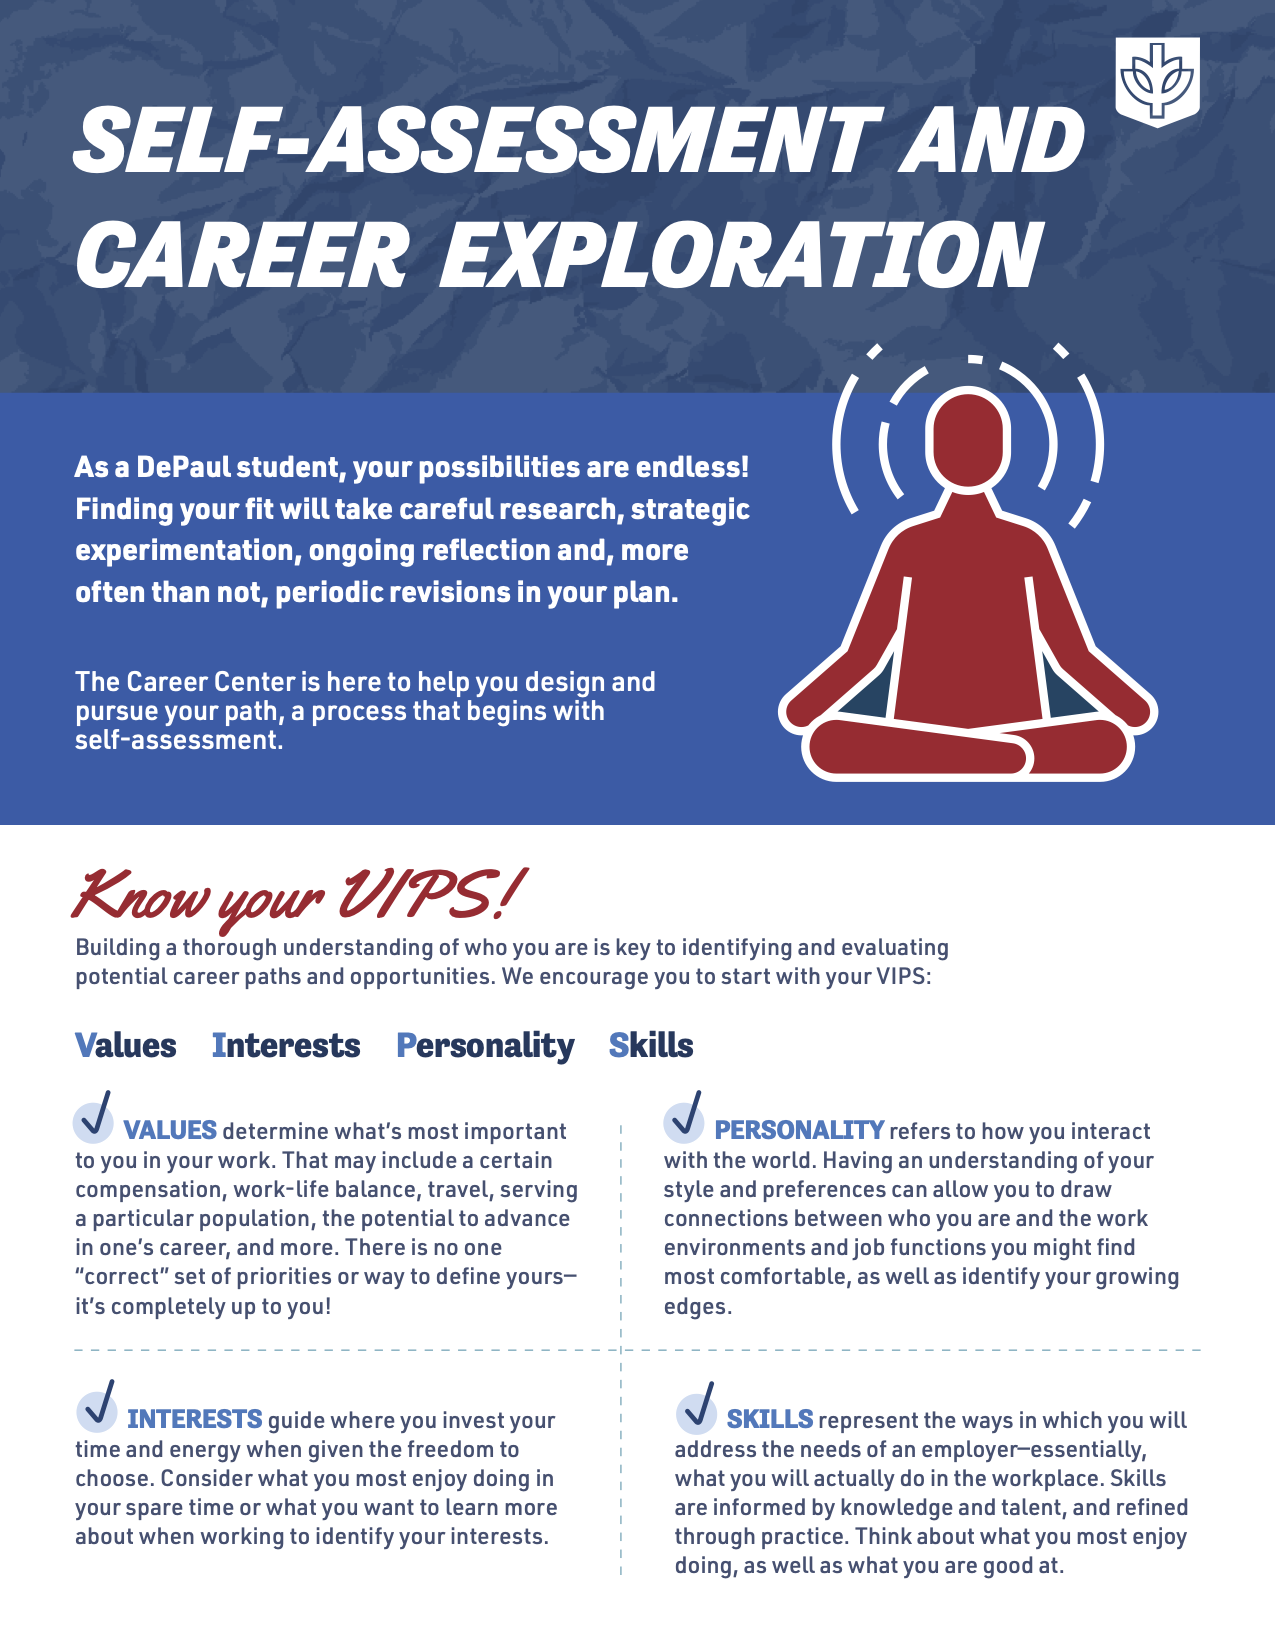 Self-Assessment and Career Exploration